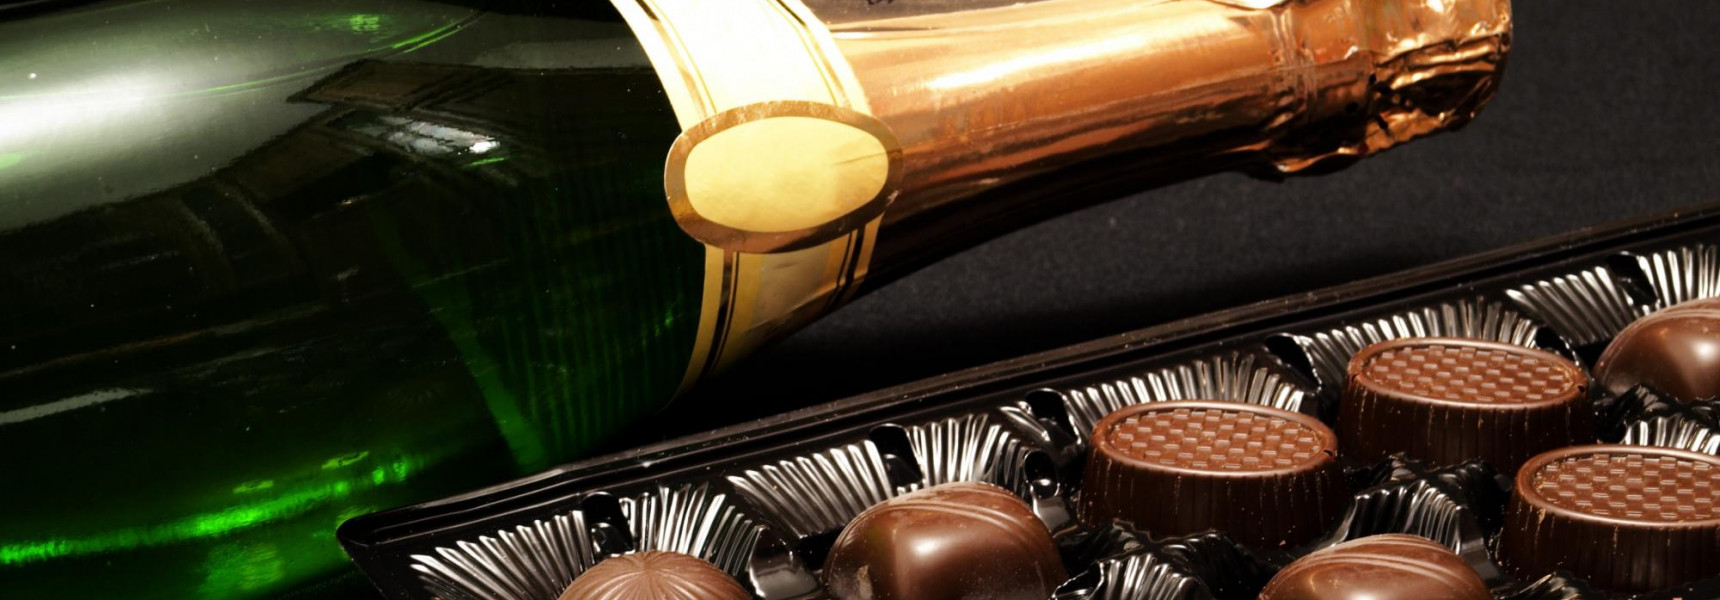 Champagne and Chocolate in Barcelona